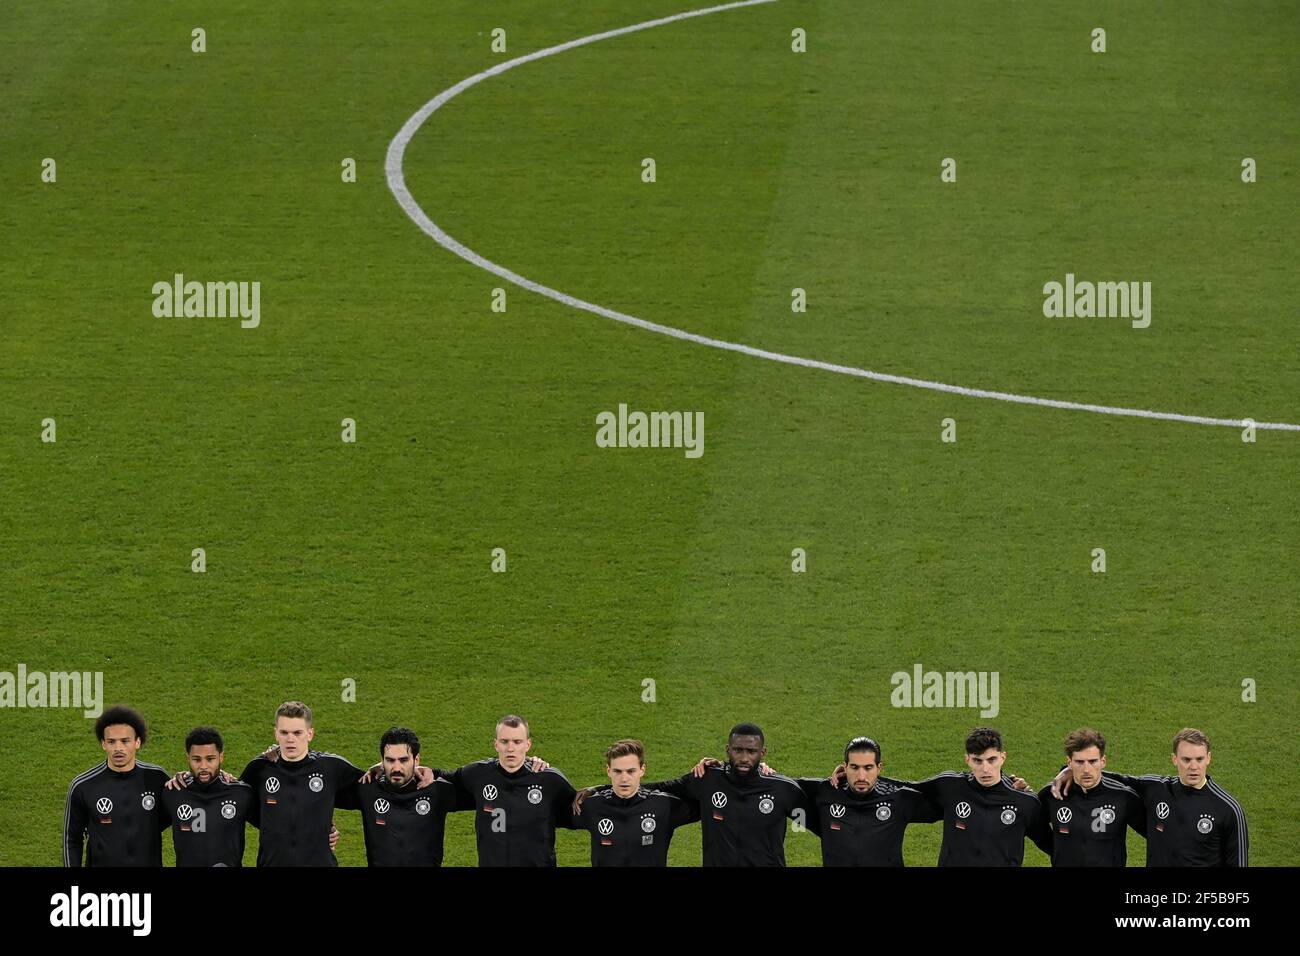 Soccer Football - World Cup Qualifiers Europe - Group J - Germany v Iceland - MSV-Arena, Duisburg, Germany - March 25, 2021 Germany line up before the match Pool via REUTERS/Tobias Schwarz Stock Photo